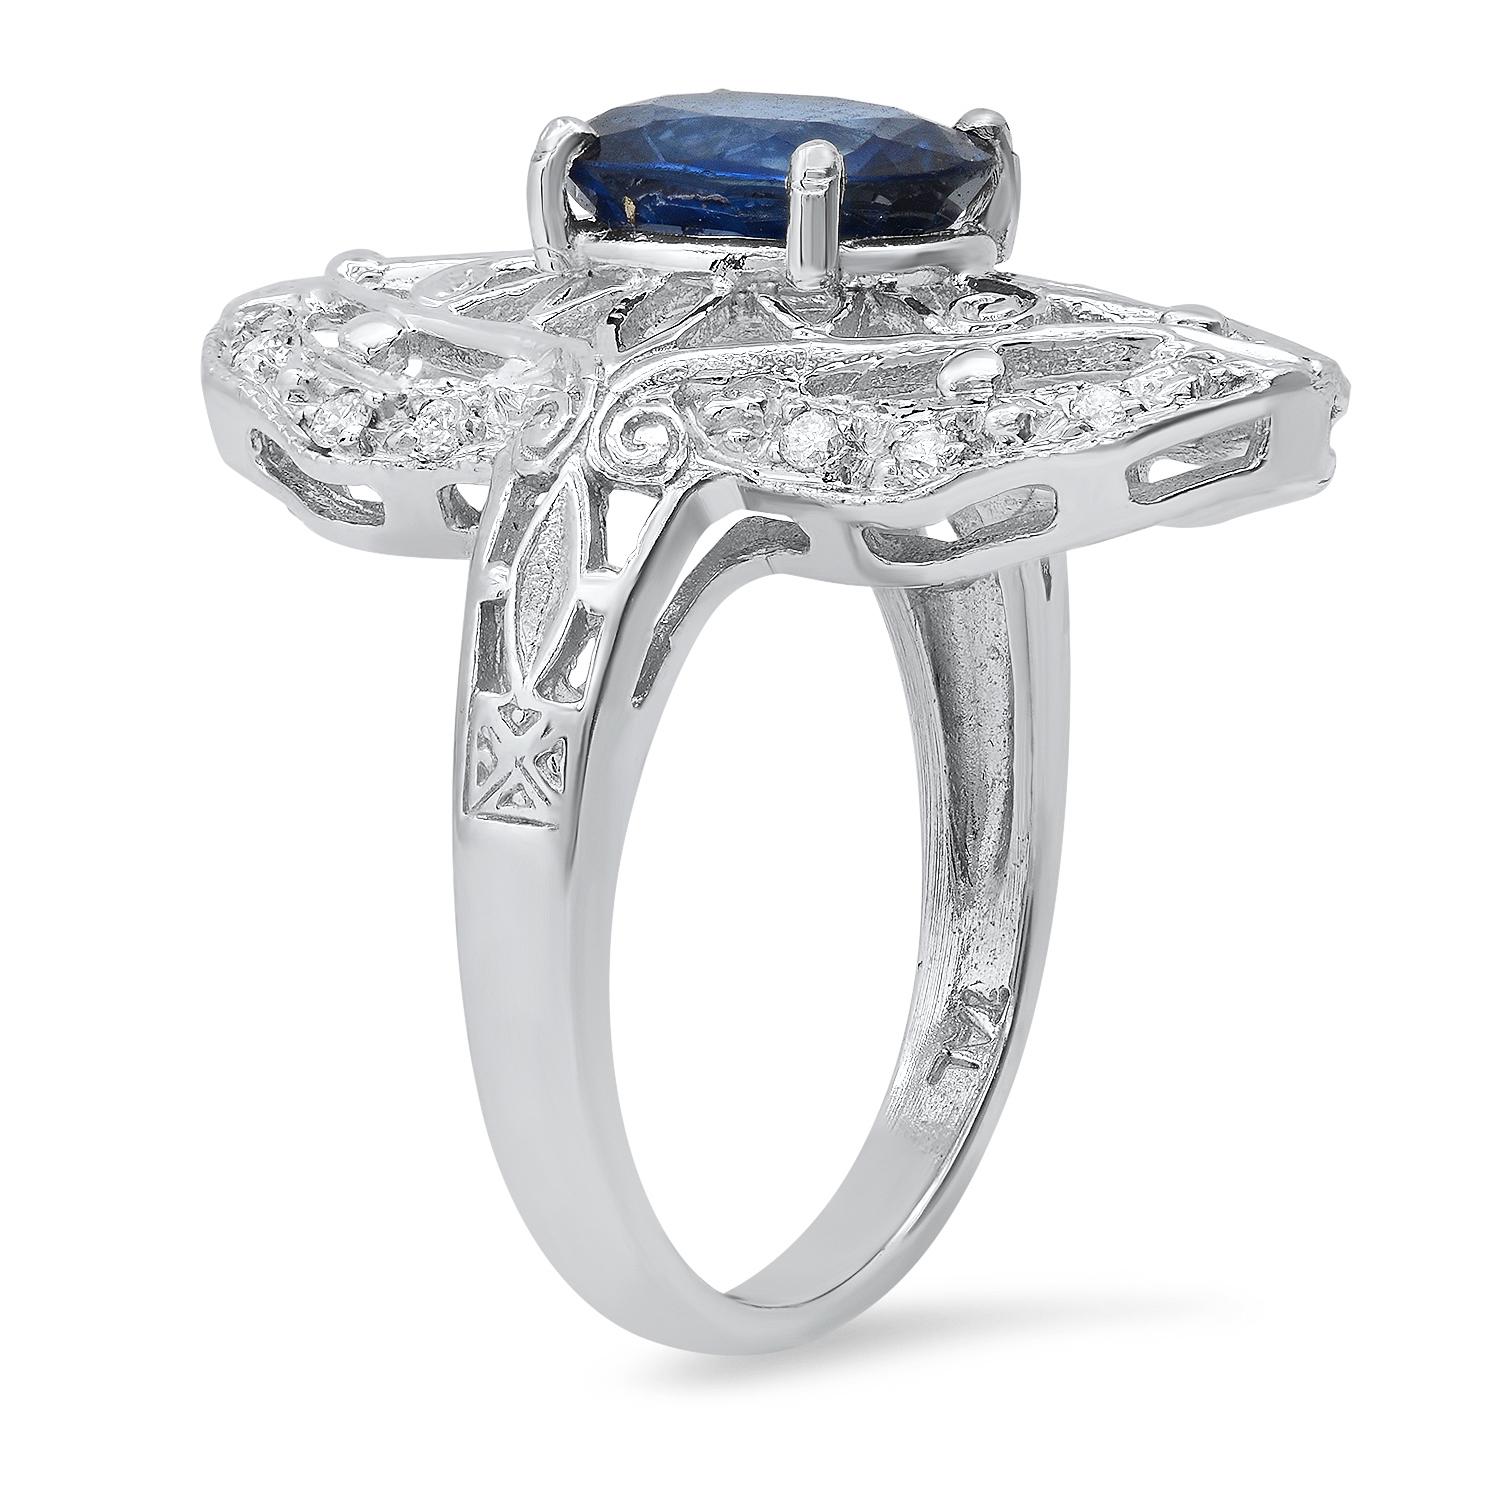 18K White Gold Setting with 1.82ct Sapphire and 0.15ct Diamond Ladies Ring